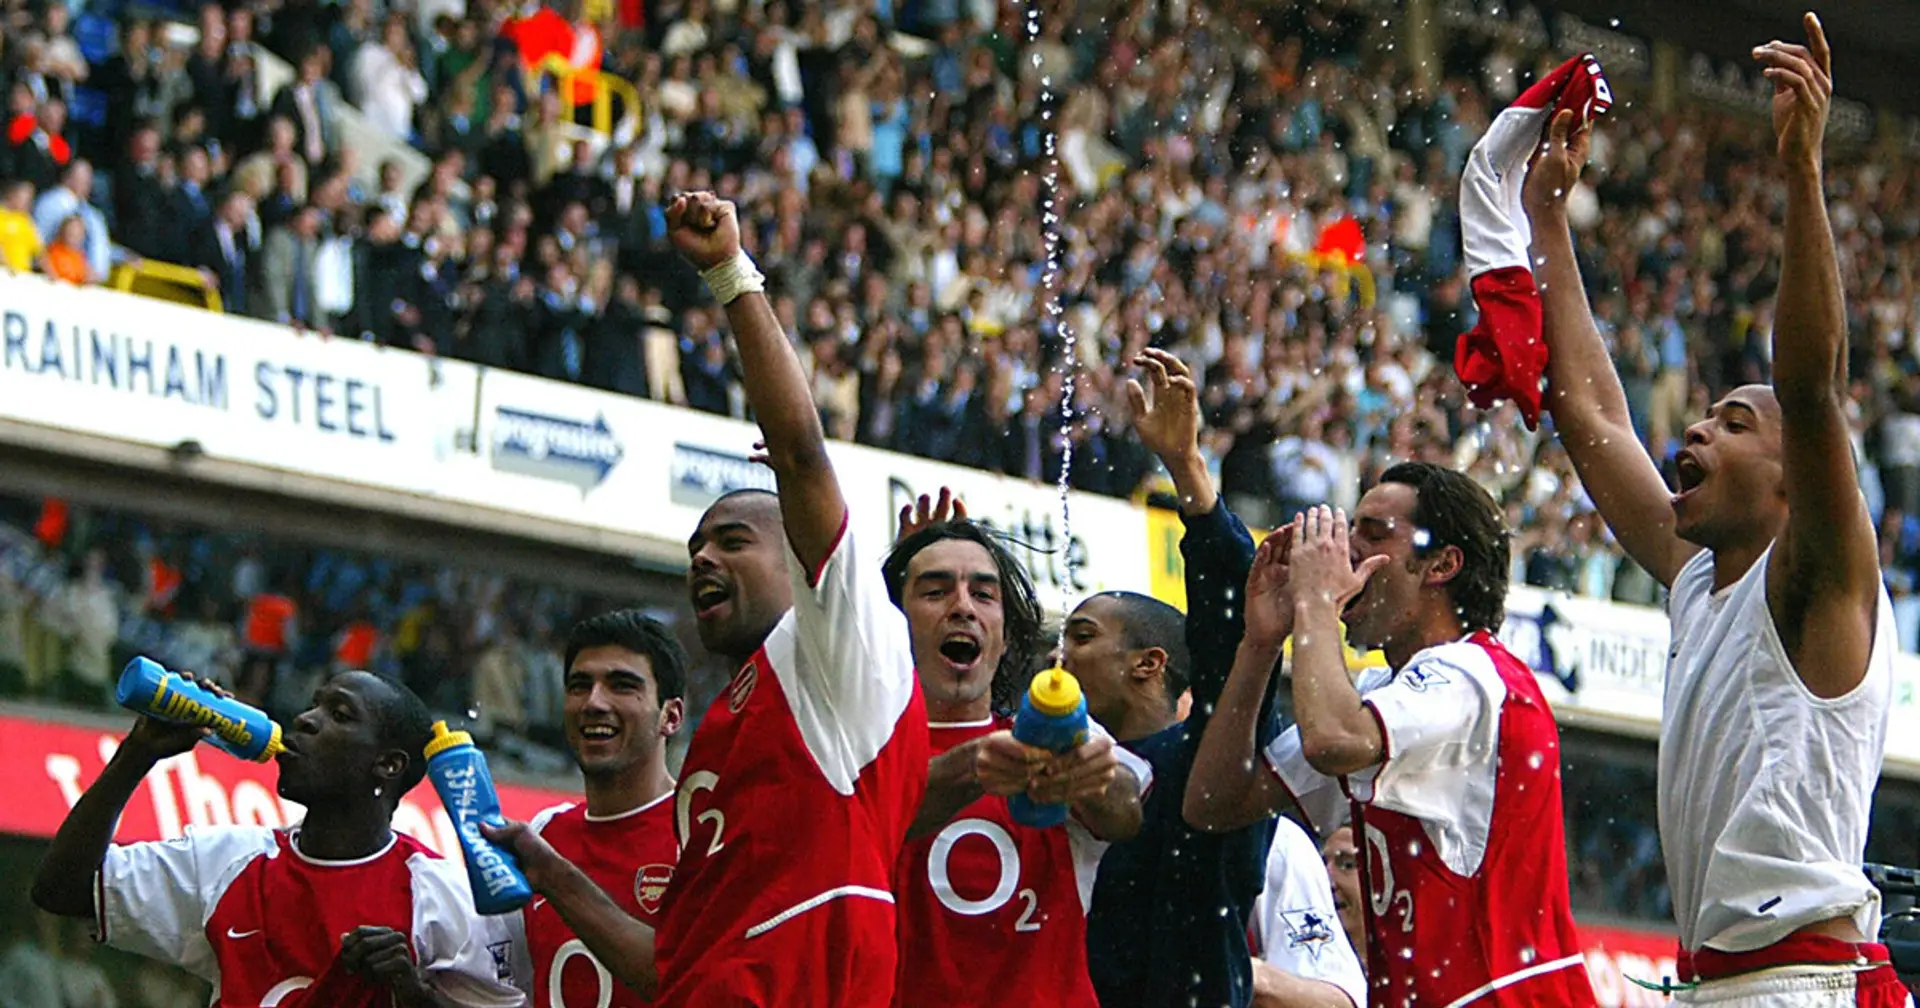 Throwback to Arsenal's 2-2 draw vs Spurs in 2004 which sealed the title at White Hart Lane